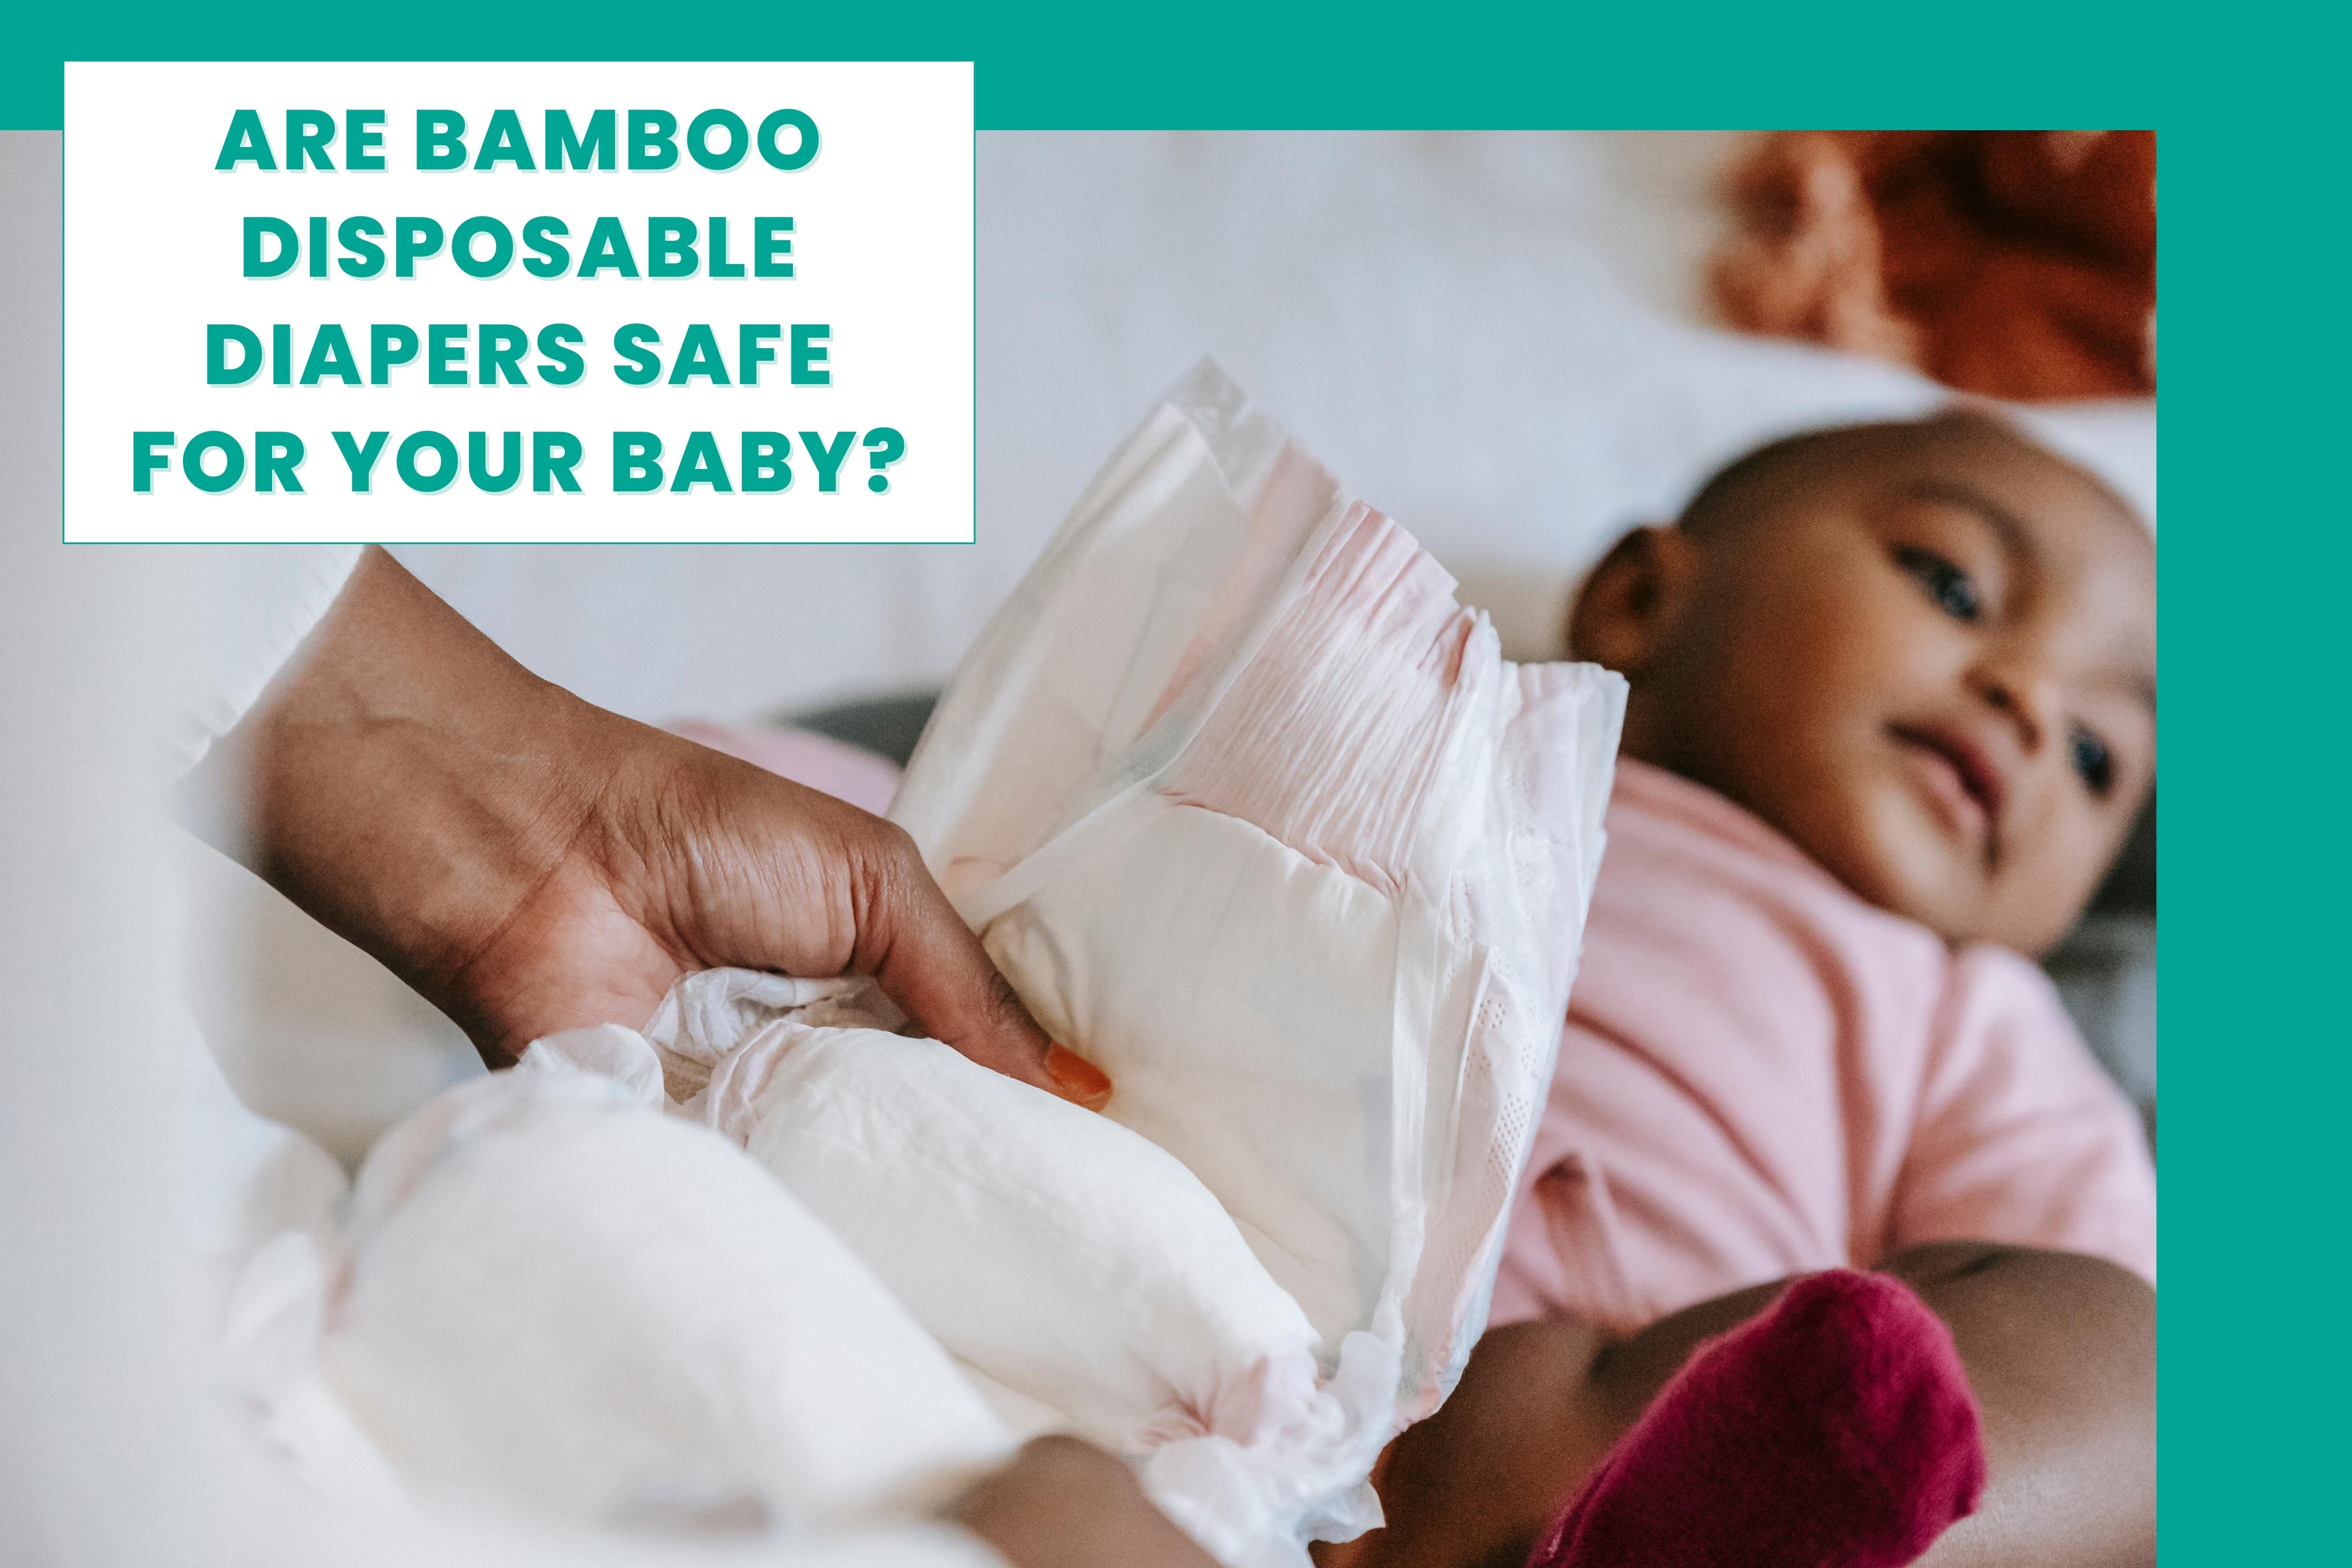 Are Bamboo Disposable Diapers Safe for Your Baby? Navigating the